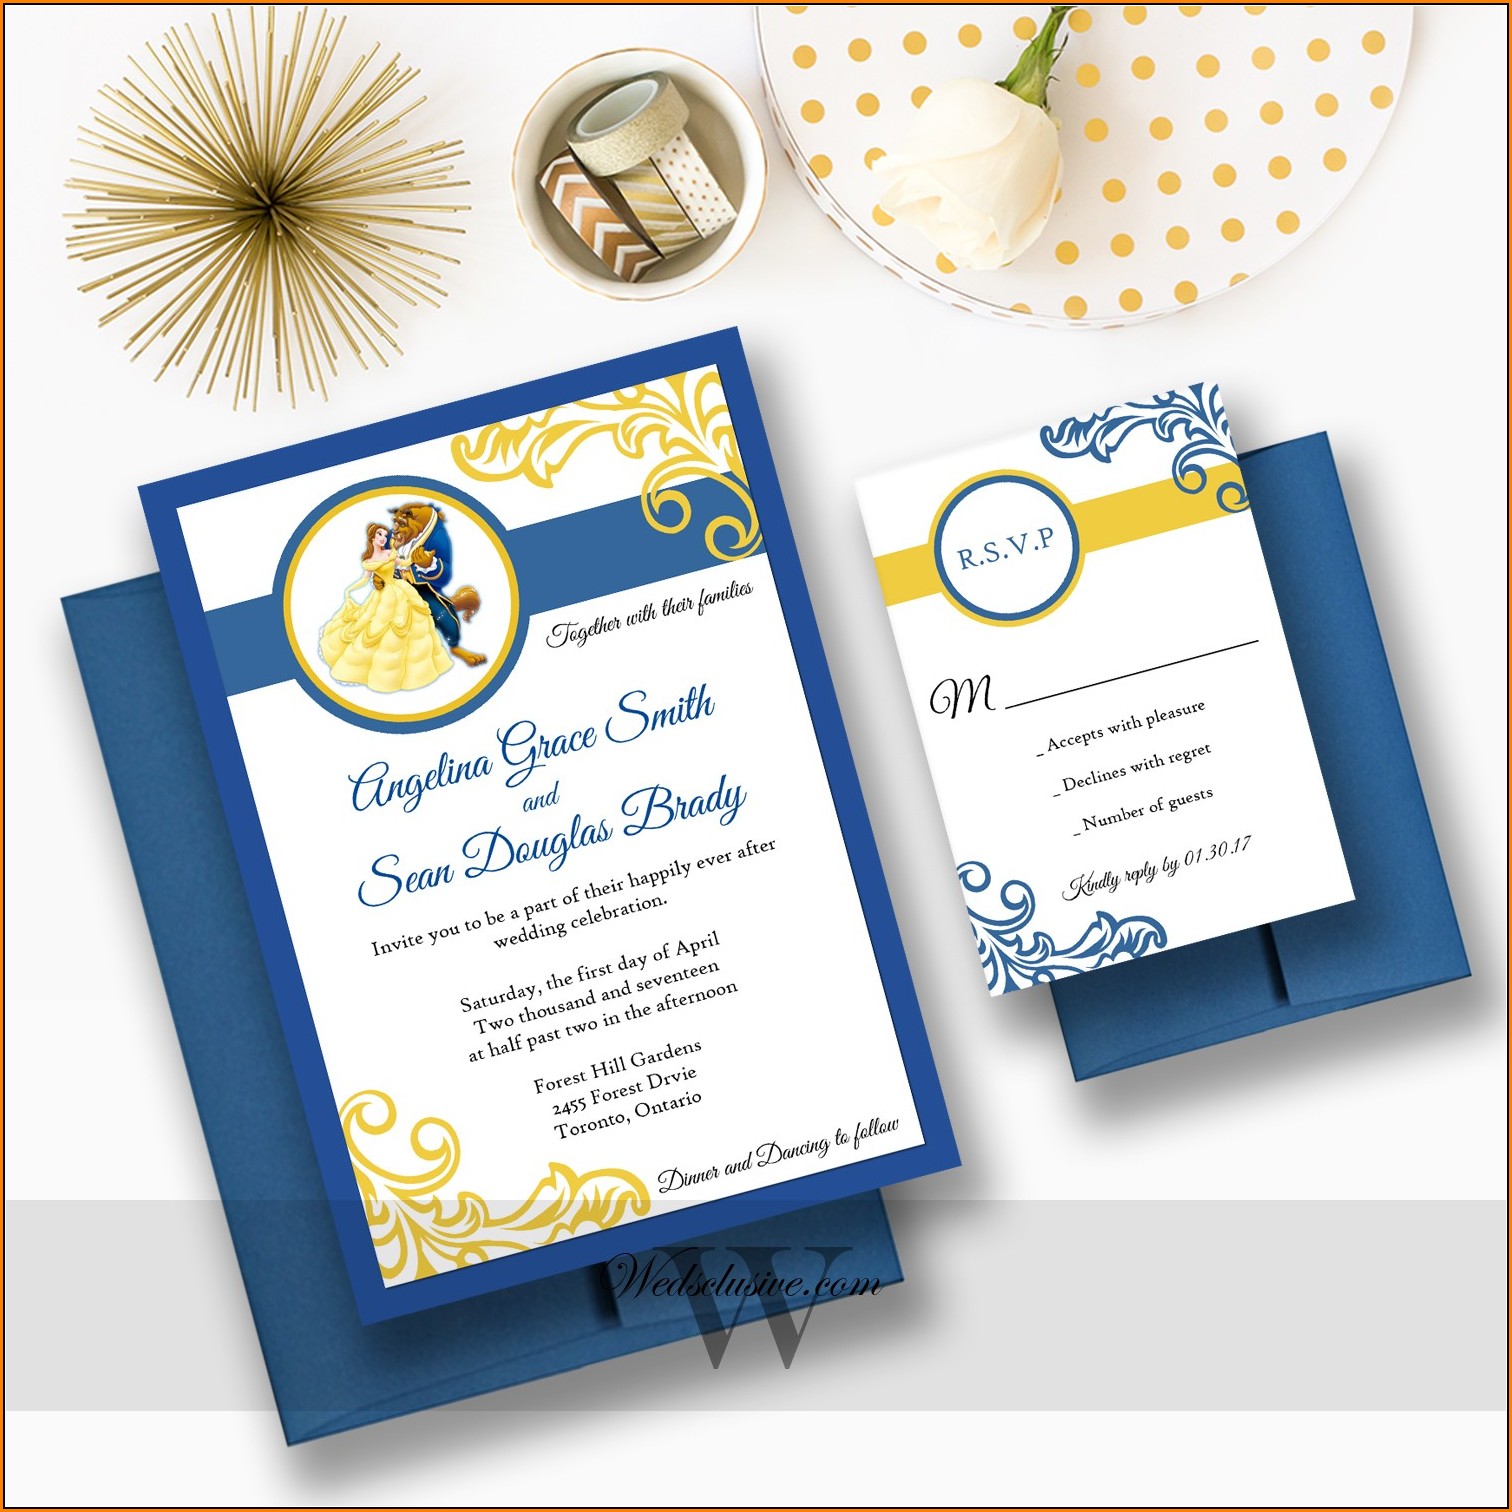 Beauty And The Beast Wedding Invitation Template Free